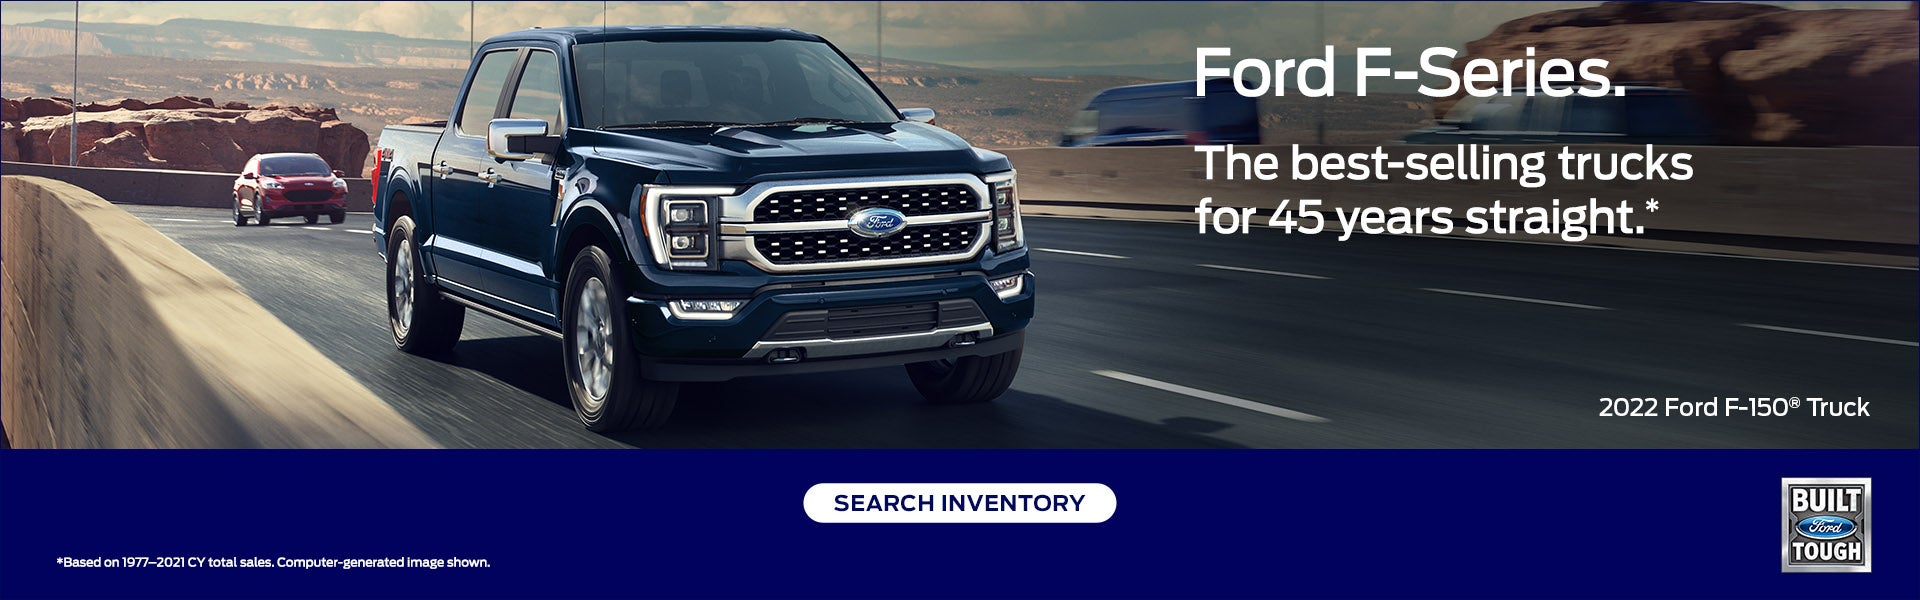 Ford F-series The best selling trucks for 45 years straight